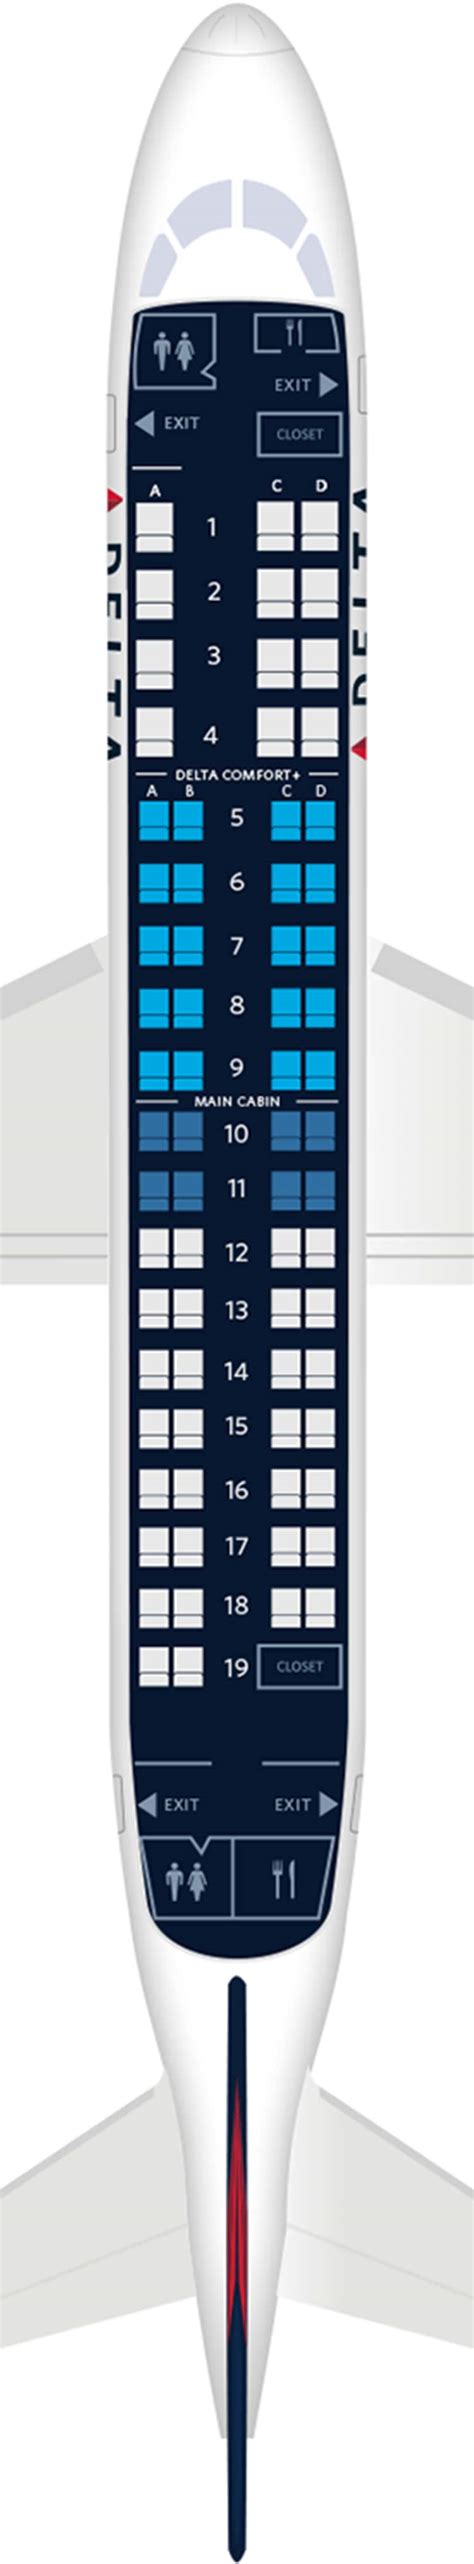 Embraer 175 seating chart. Things To Know About Embraer 175 seating chart. 